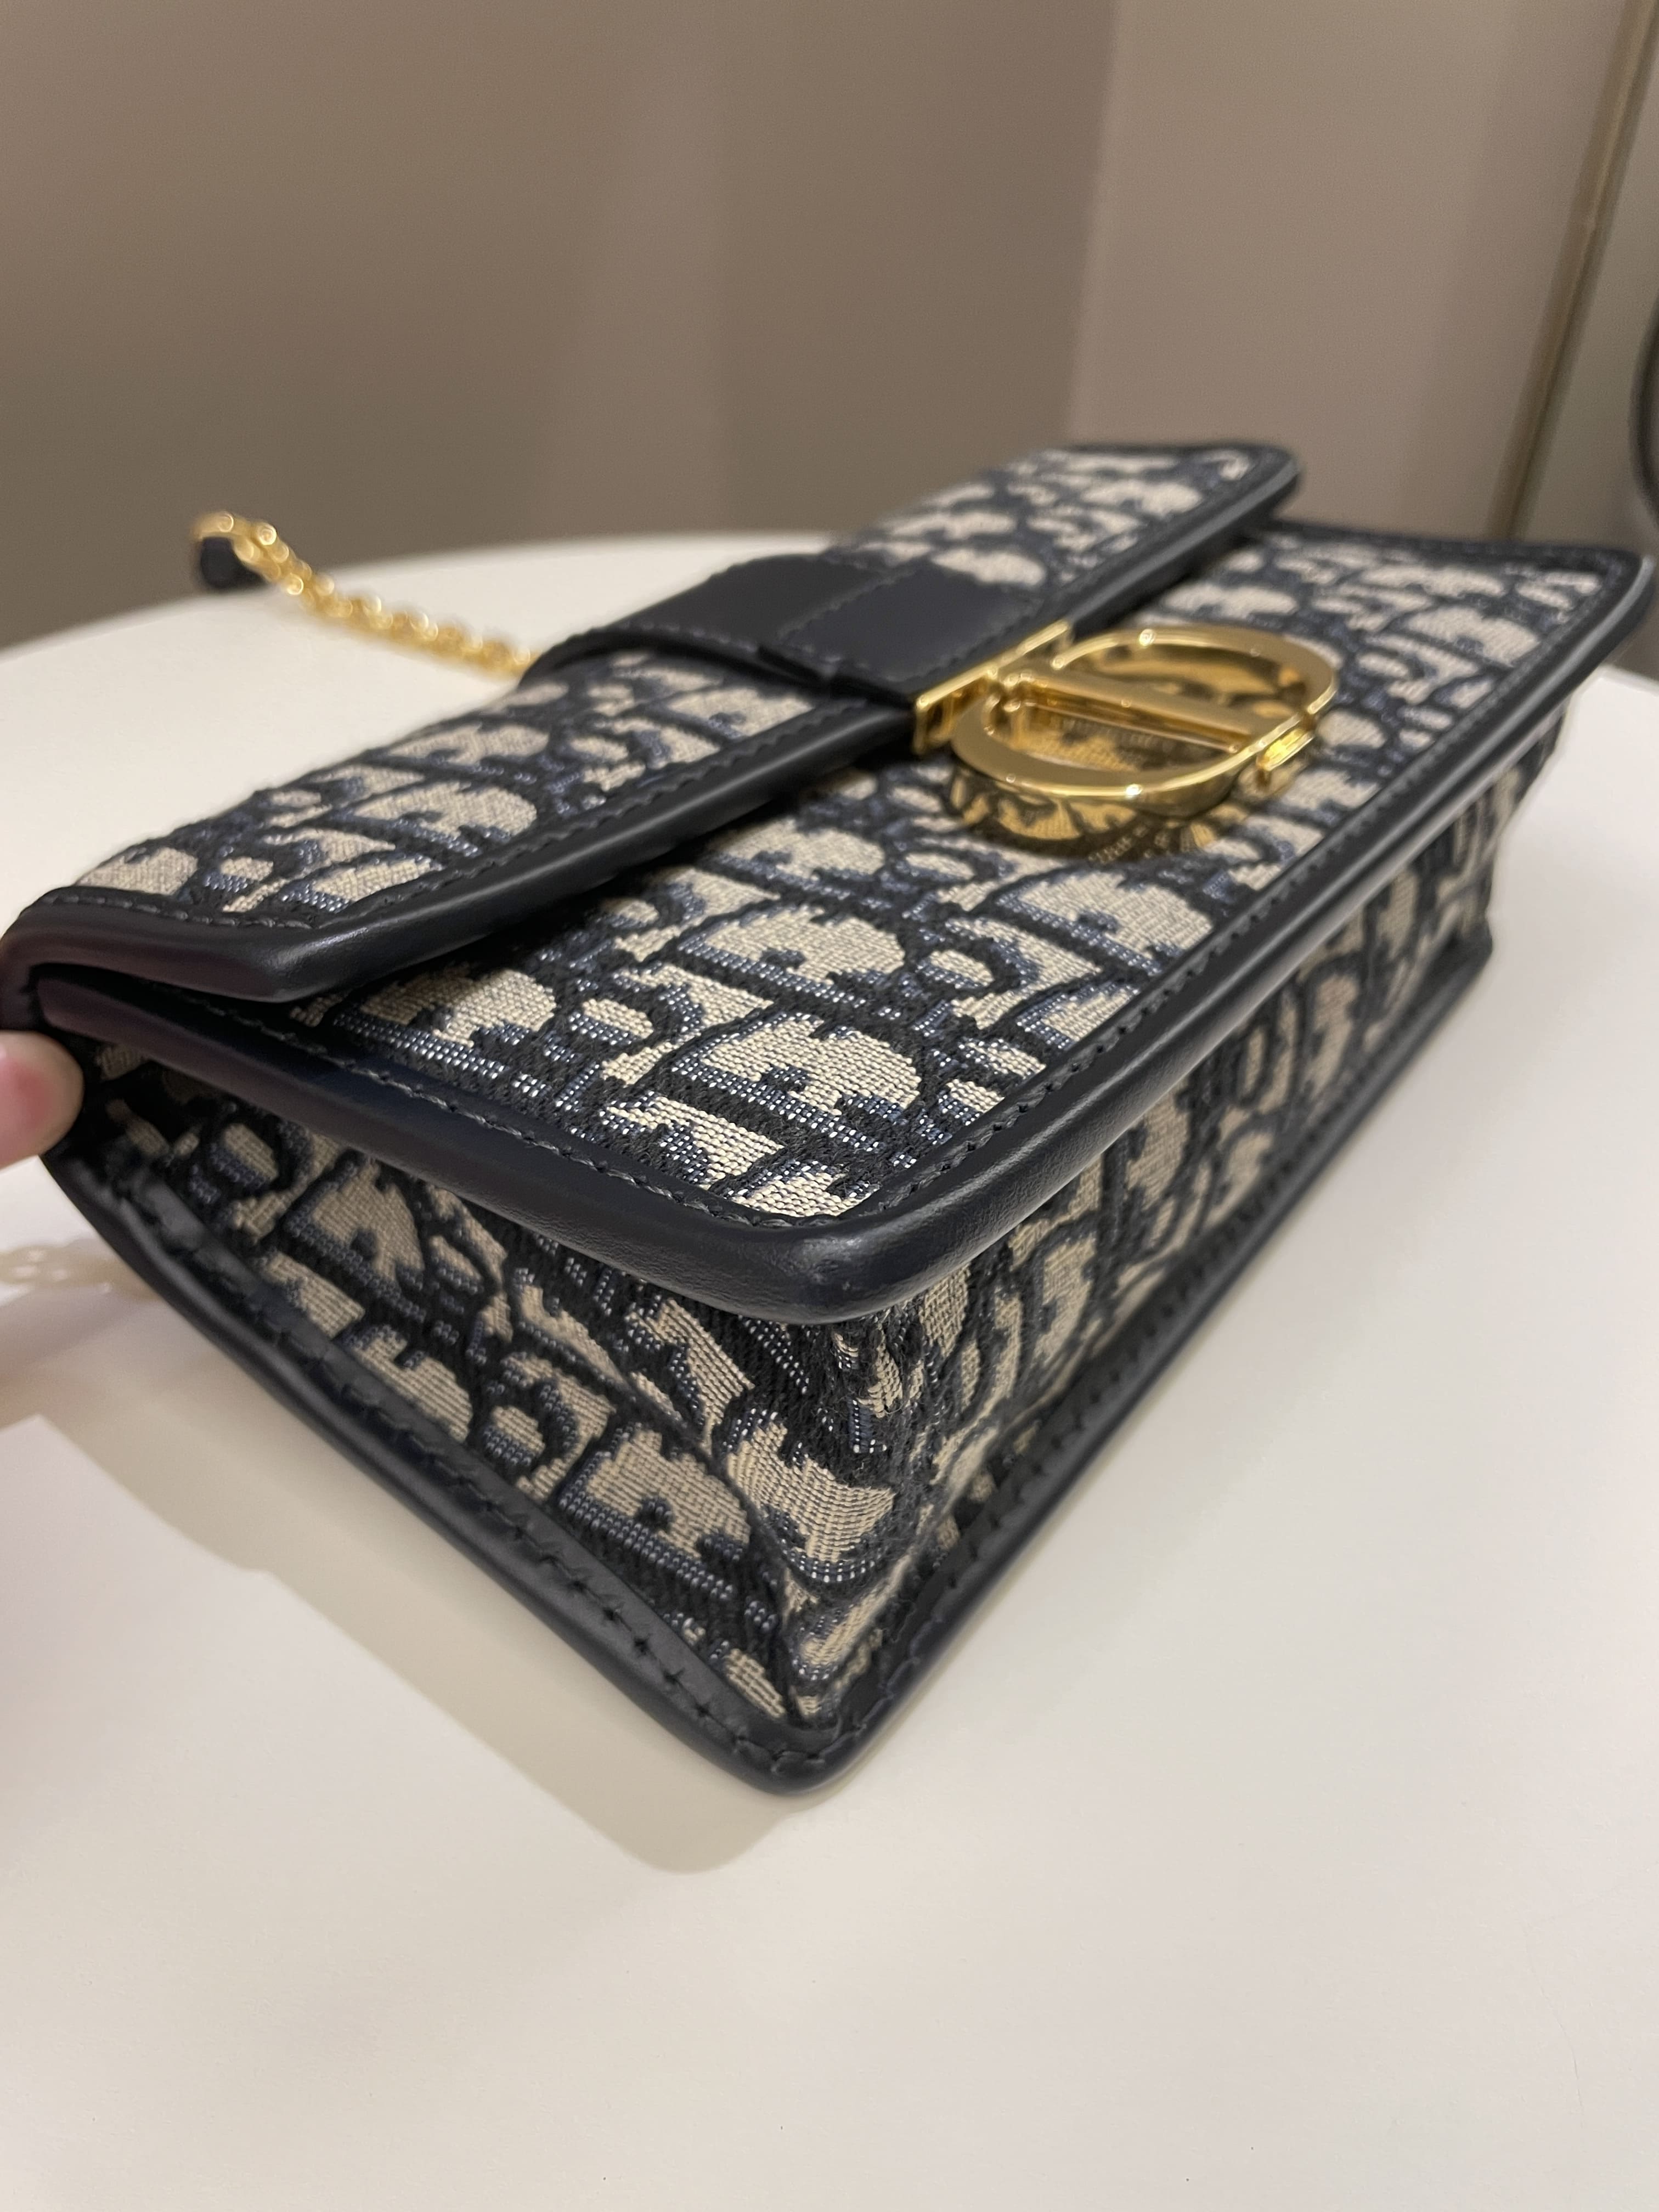 🇲🇾YSL Beige Envelope Chain Bag🤎, Gallery posted by DM Luxshop